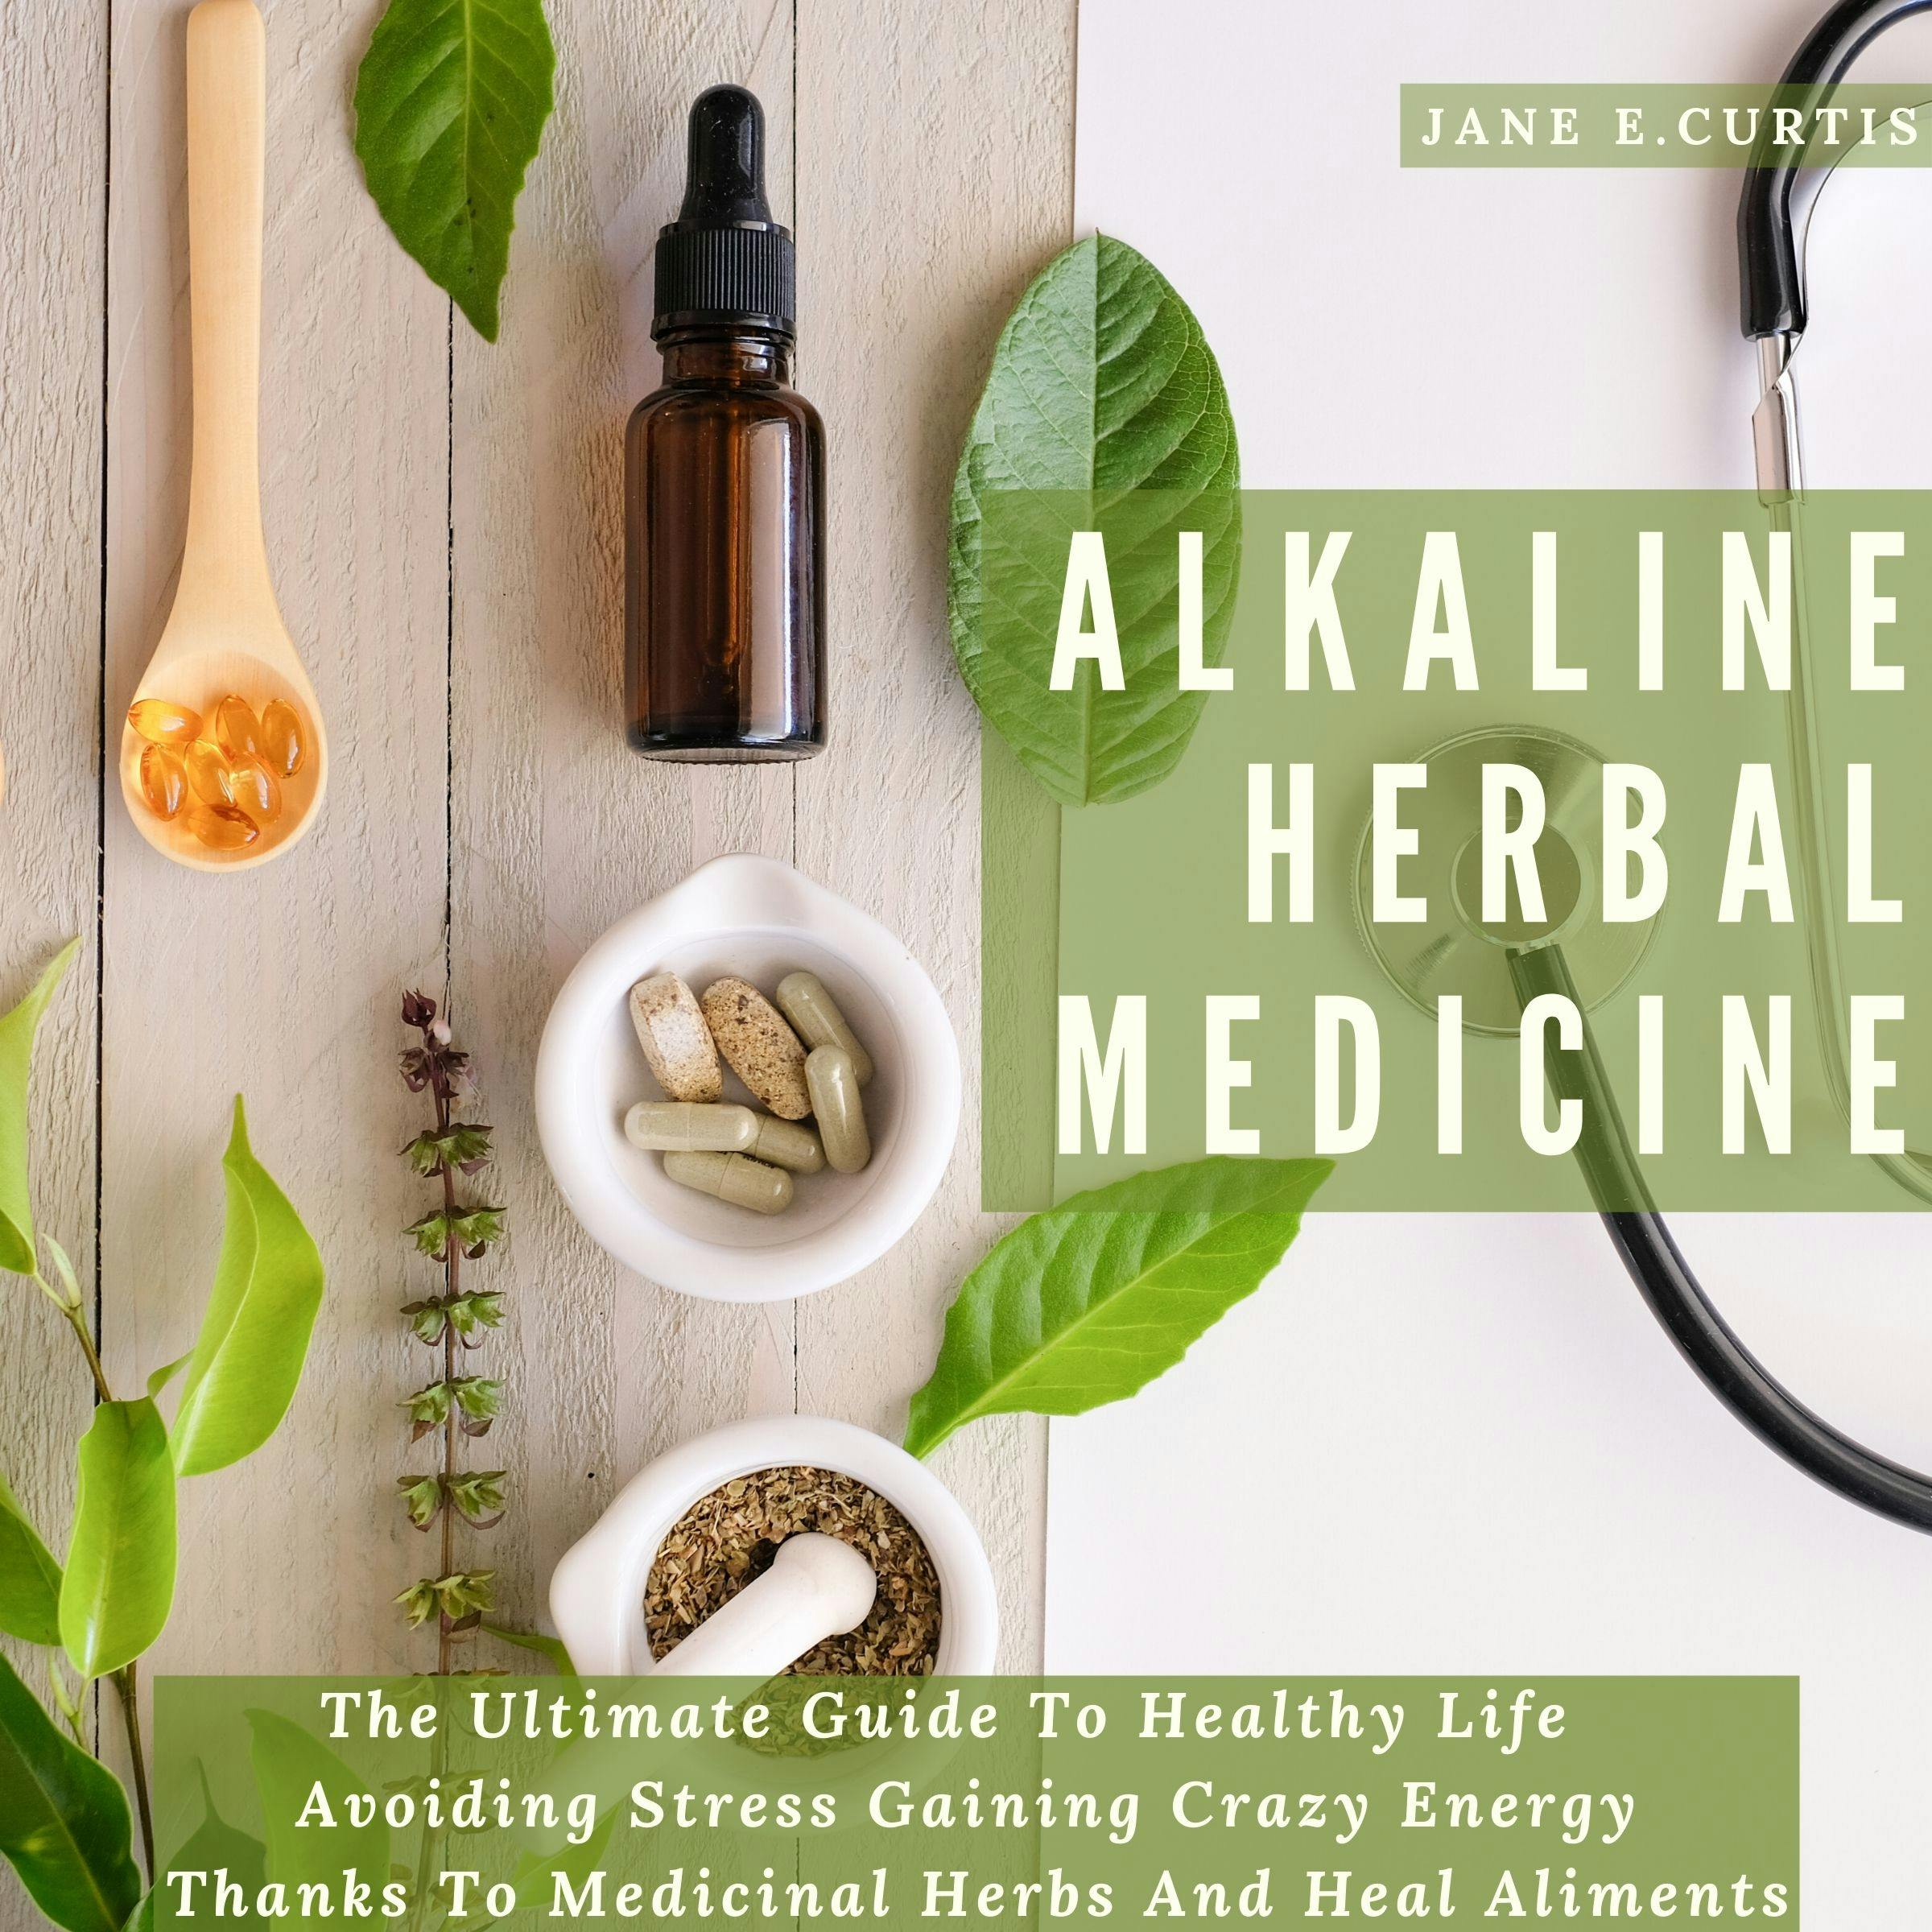 Alkaline Herbal Medicine: The Ultimate Guide To Healthy Life , Avoiding Stress, Gaining Crazy Energy Thanks To Medicinal Herbs And Heal Aliments - Jane E. Curtis